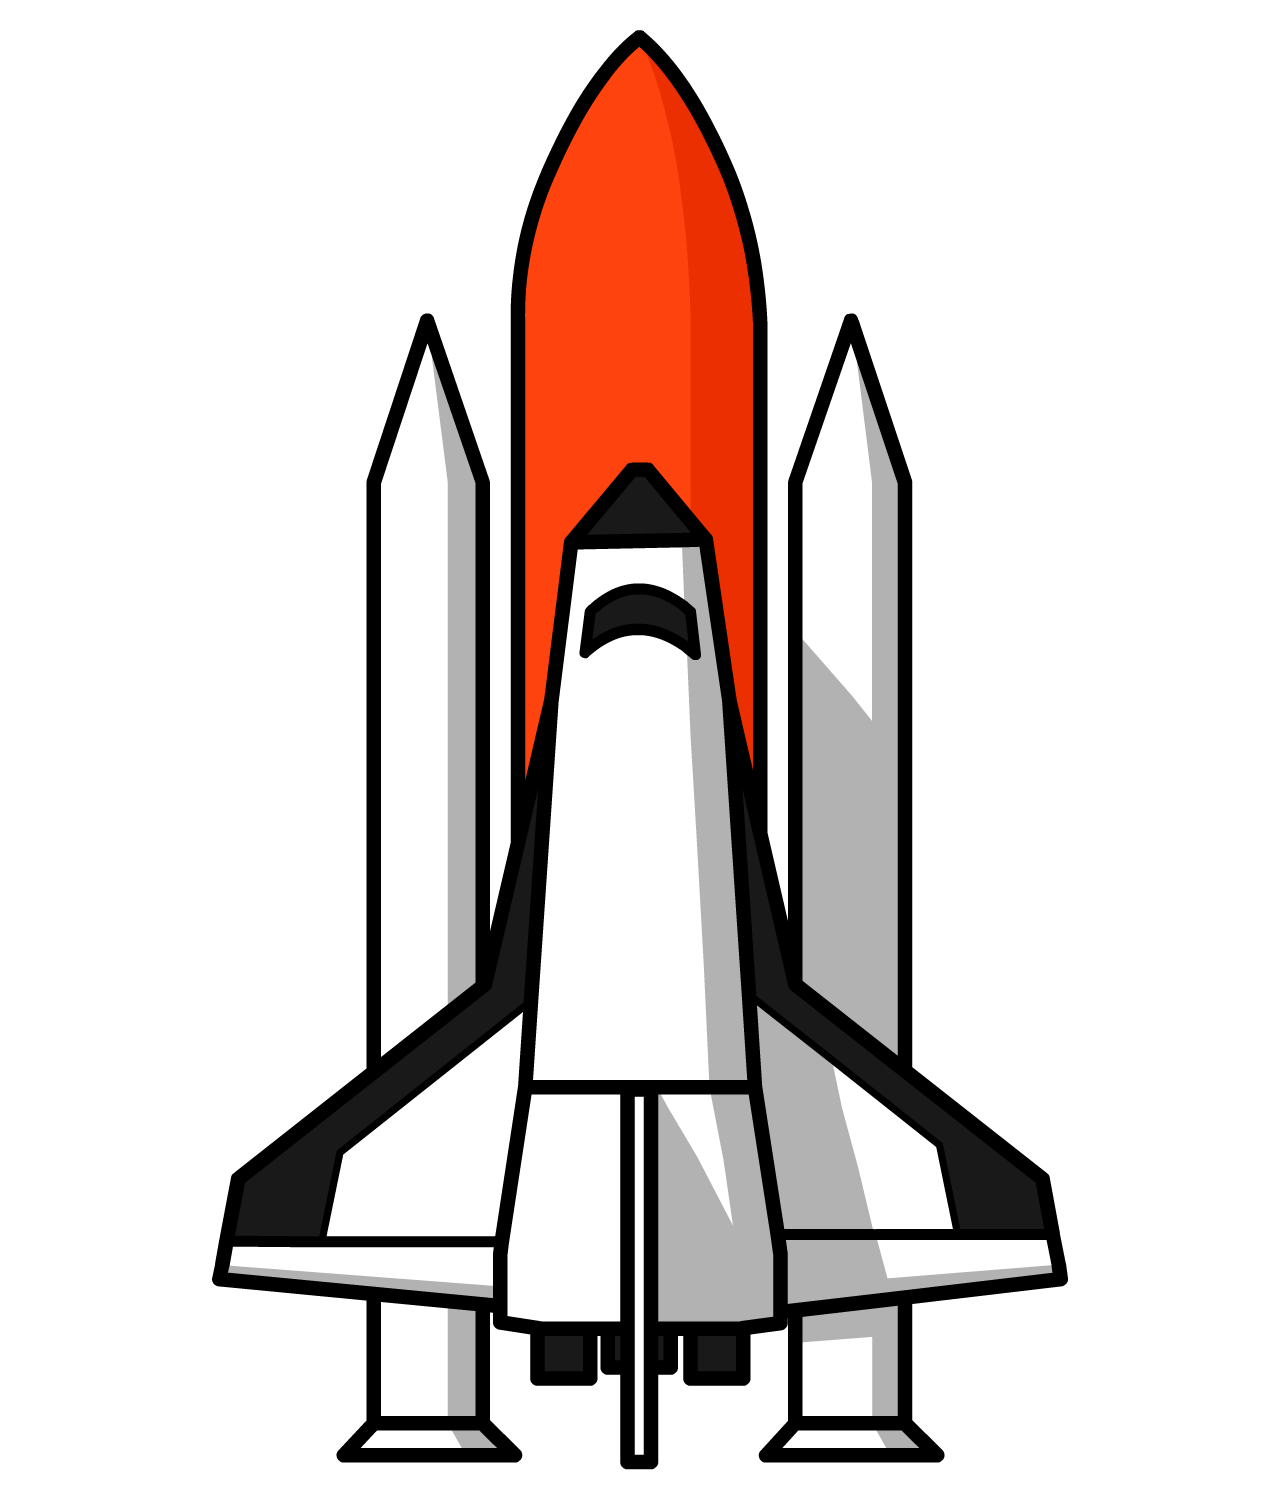 Image - Beta Team Solar System Space Shuttle.png | Club Penguin Wiki